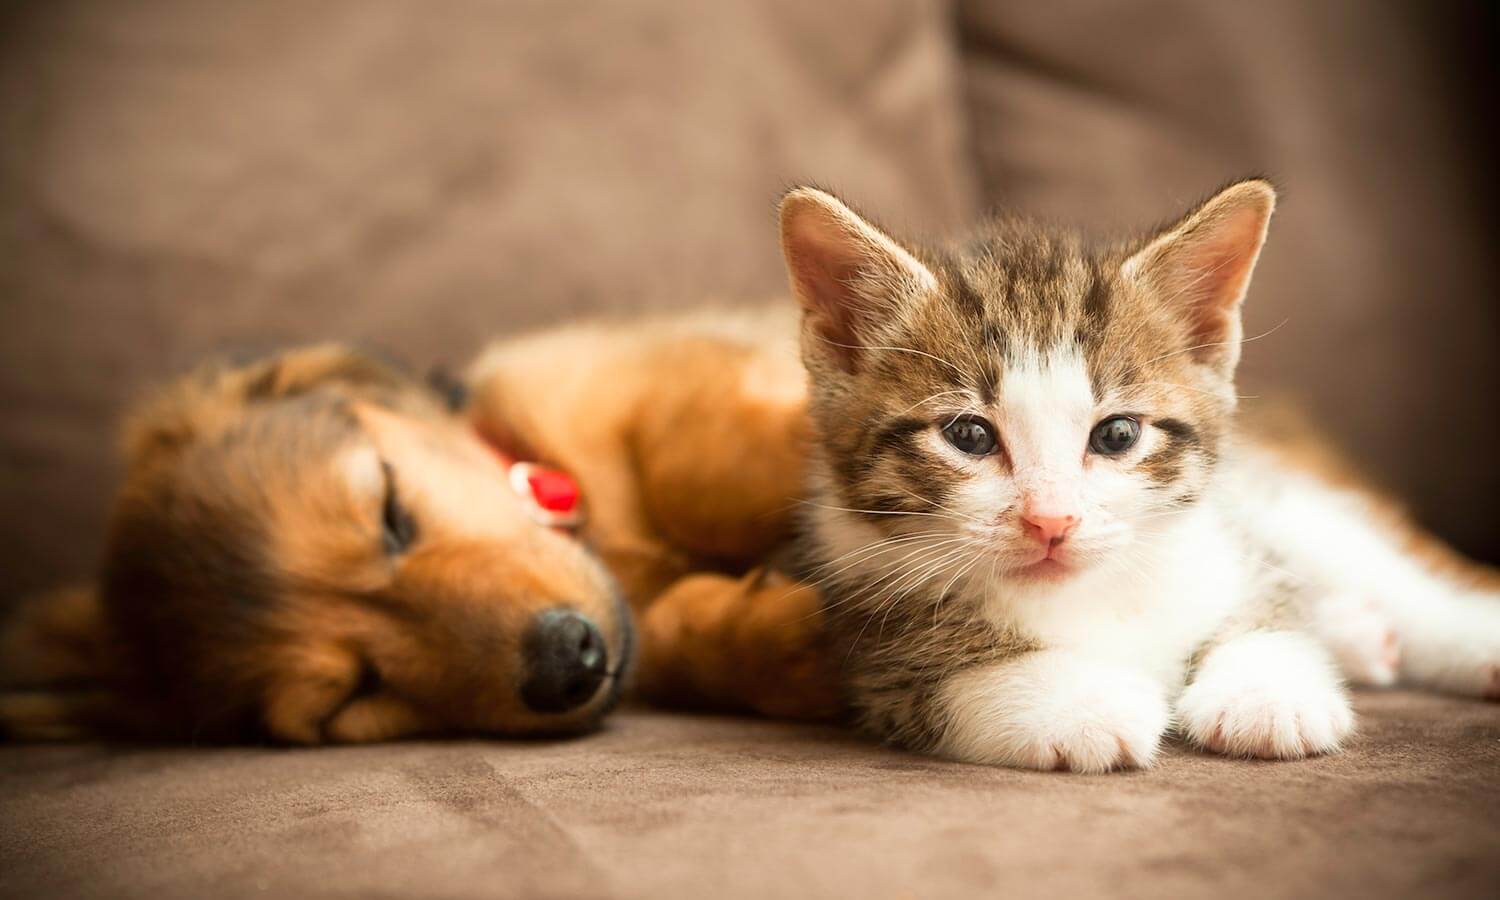 A kitten and puppy on a couch